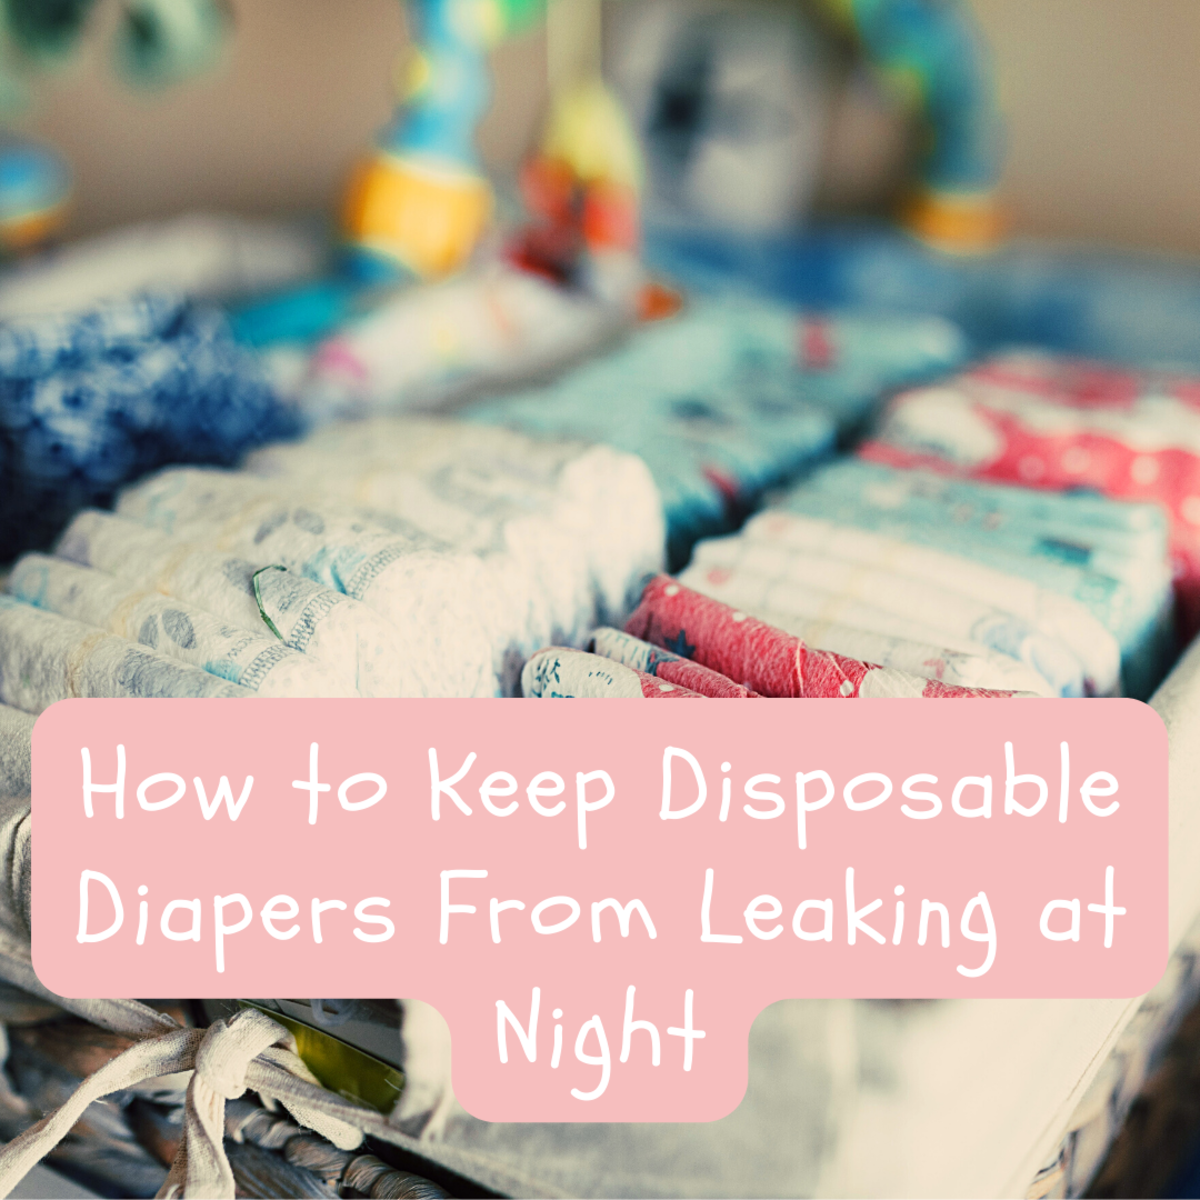 Have leaky diapers? Learn how to keep your disposable diapers from leaking.